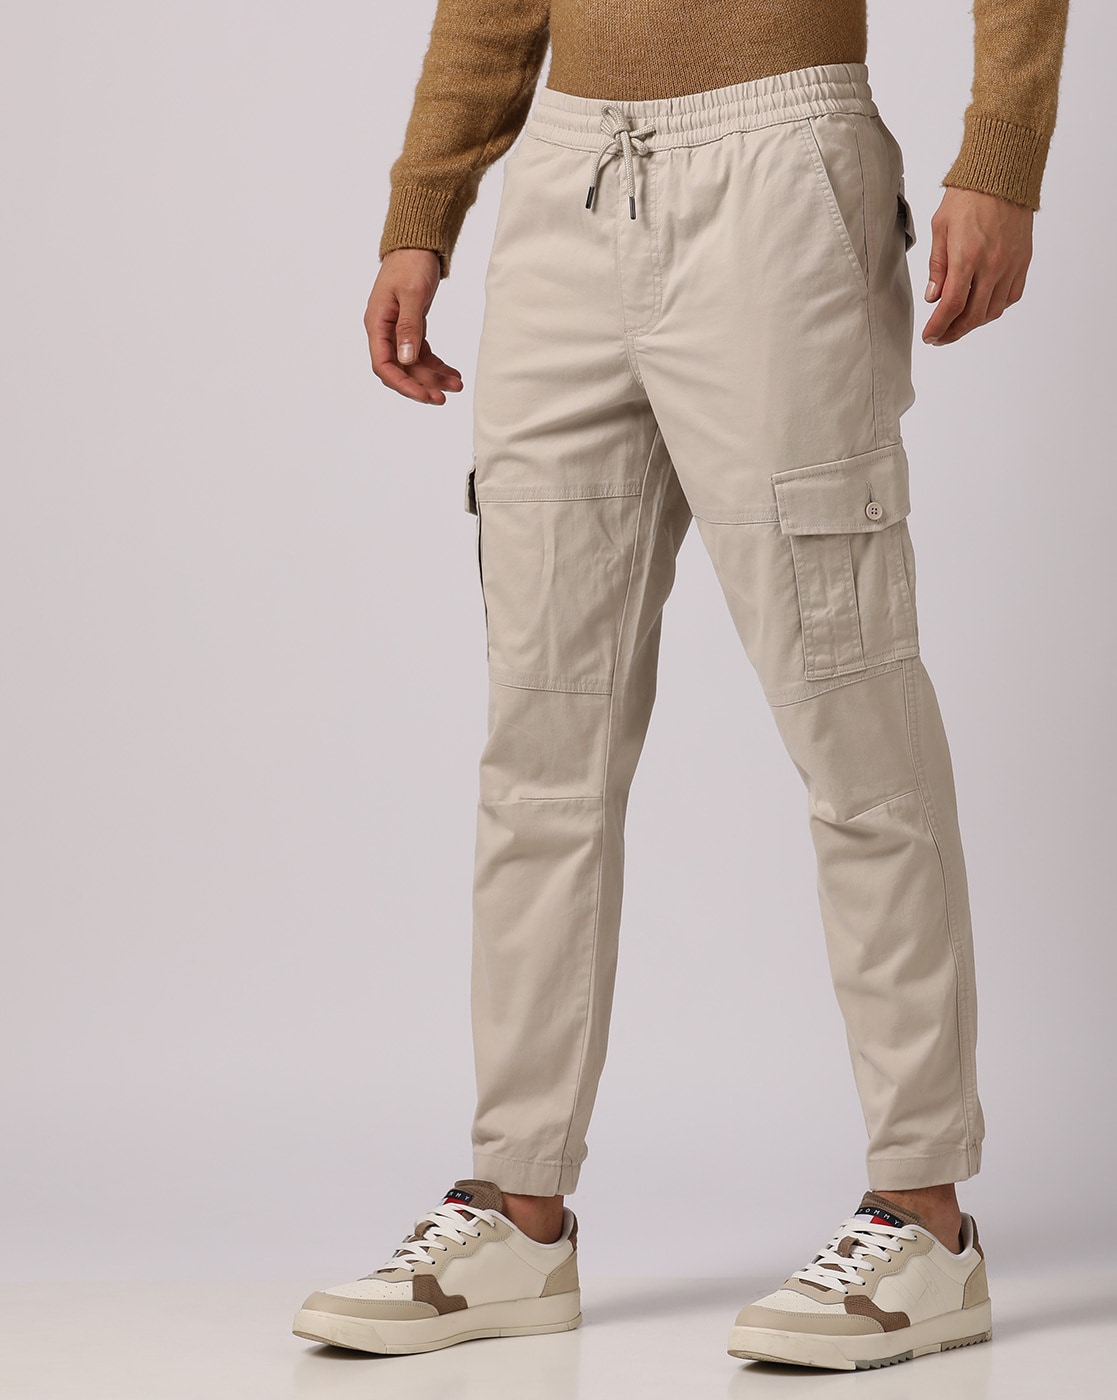 Buy American Noti Men White Solid Regular fit Regular trousers Online at  Low Prices in India - Paytmmall.com